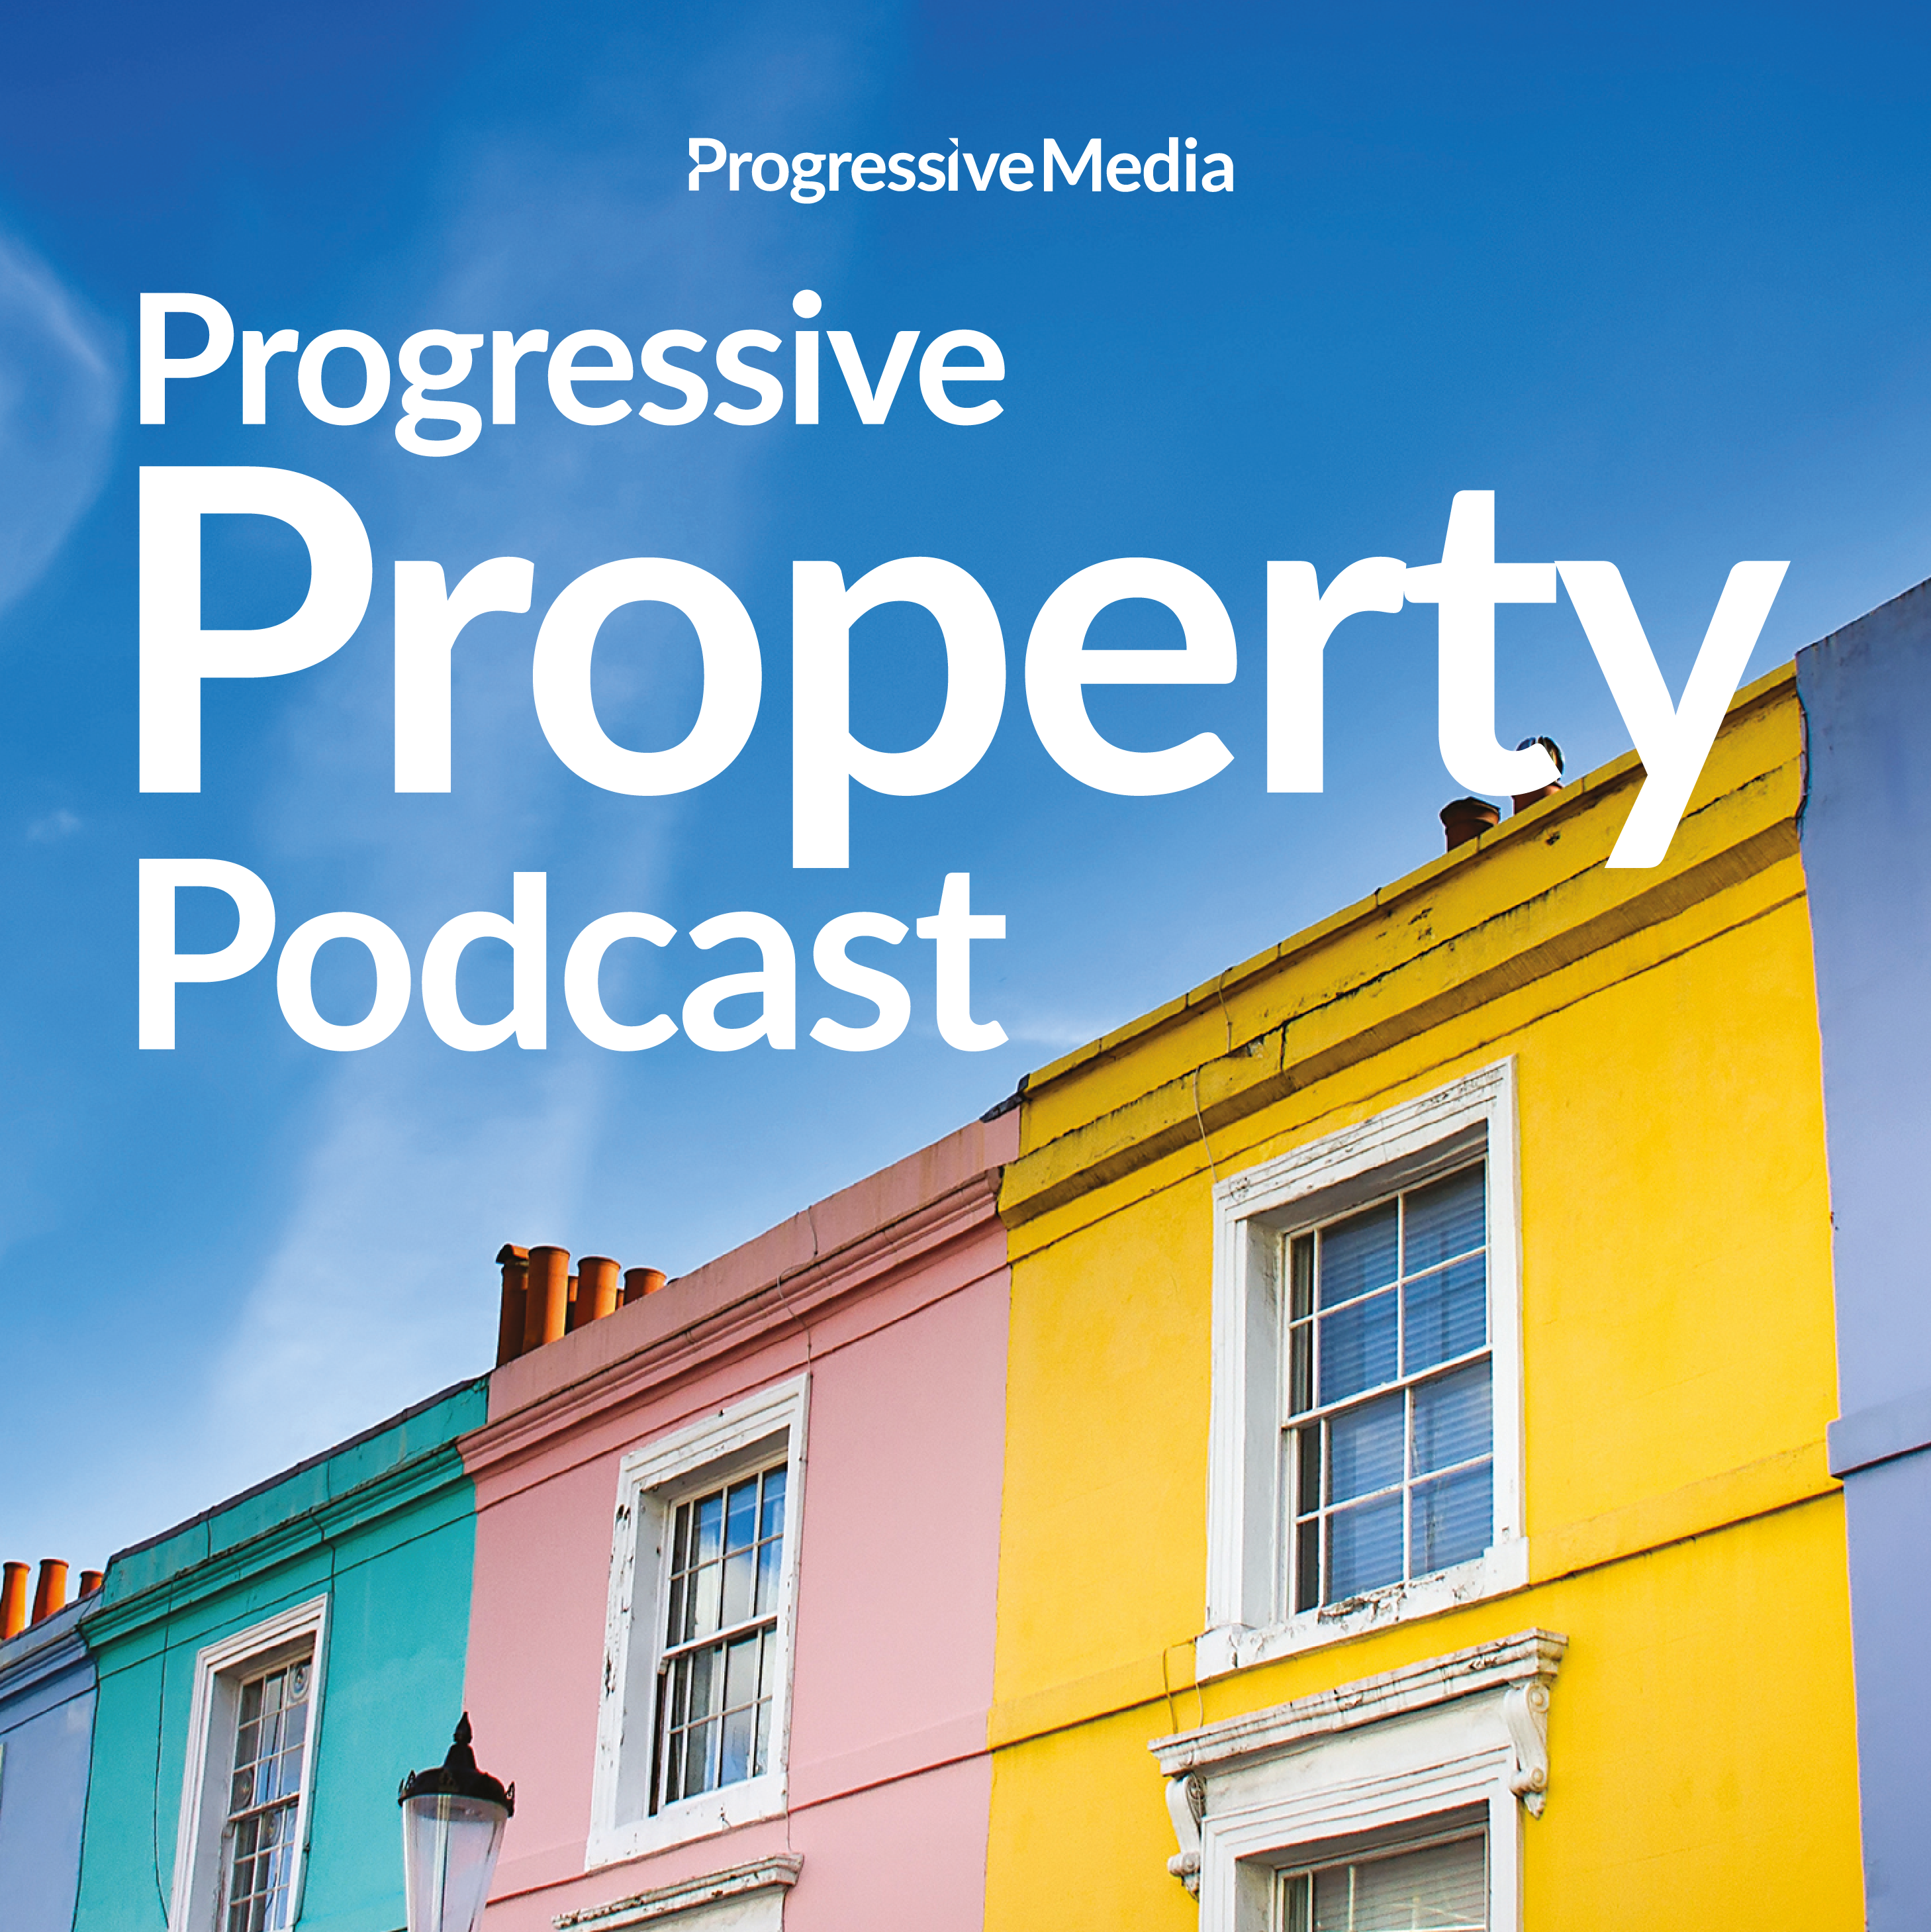 Progressive Property 10 year anniversary special with Rob Moore and Mark Homer